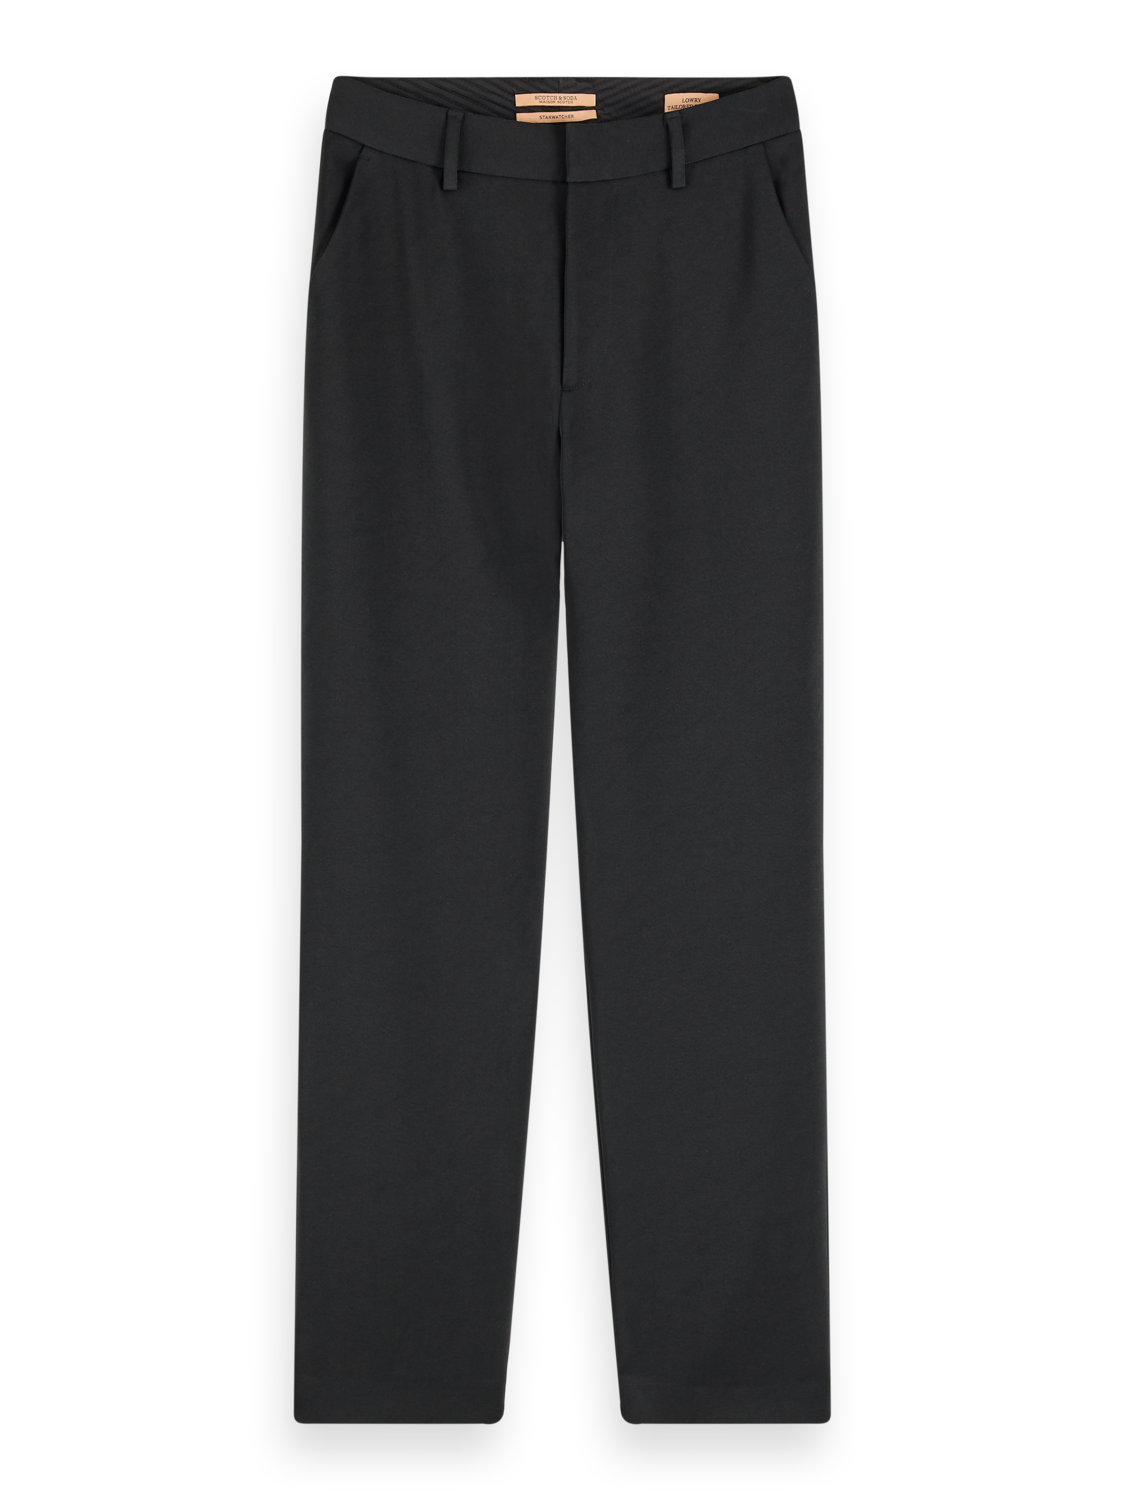 Scotch & Soda Lowry' Tailored slim fit pant in chic quality - Brave